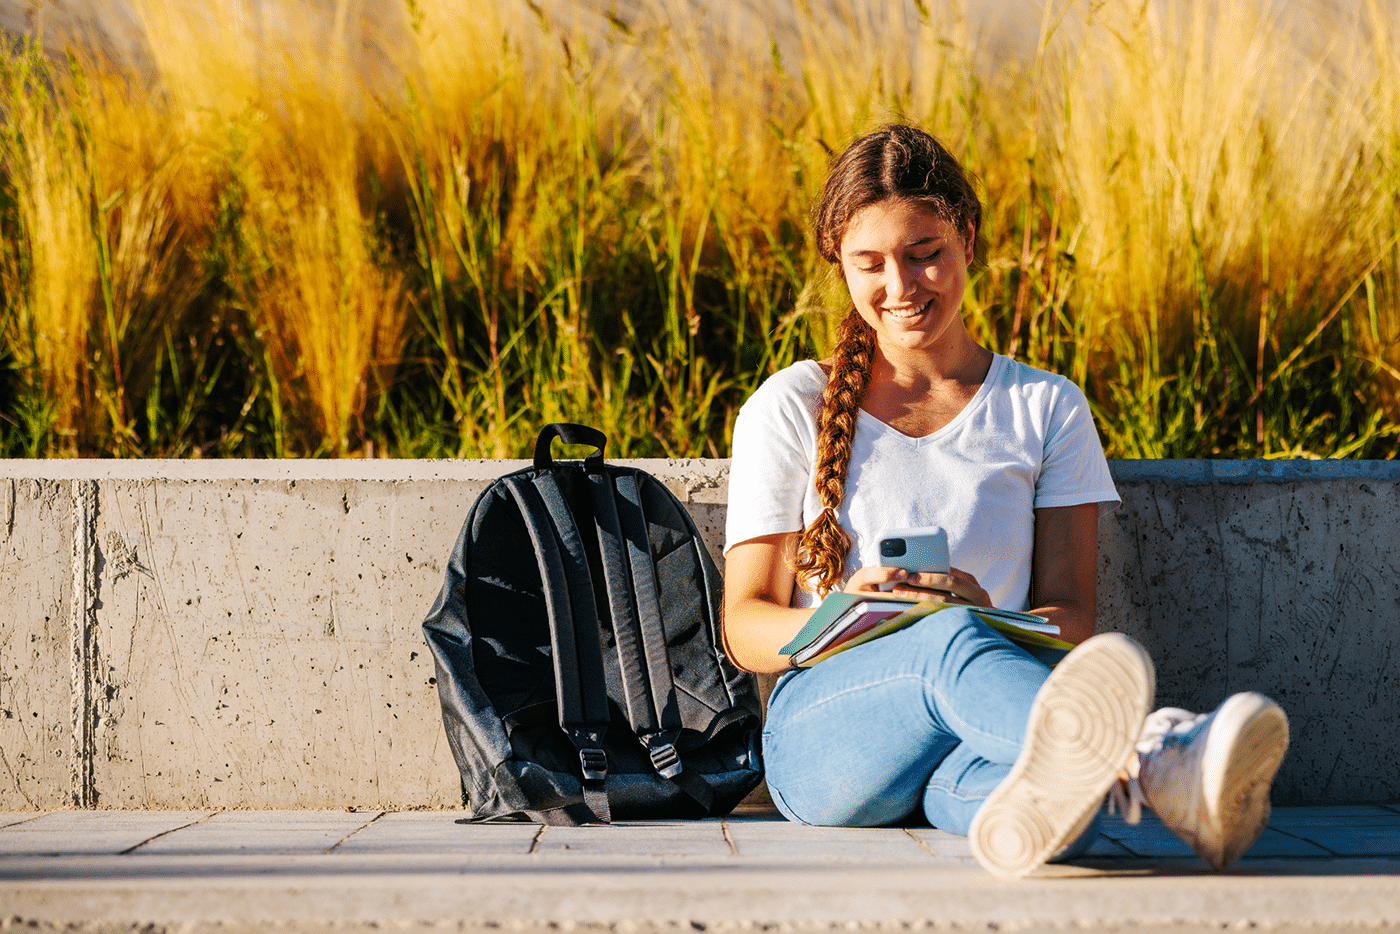 Portrait of a beautiful, young and intelligent-looking blonde braids college student woman wearing a white shirt and jeans smiling as she studies at the campus of her university